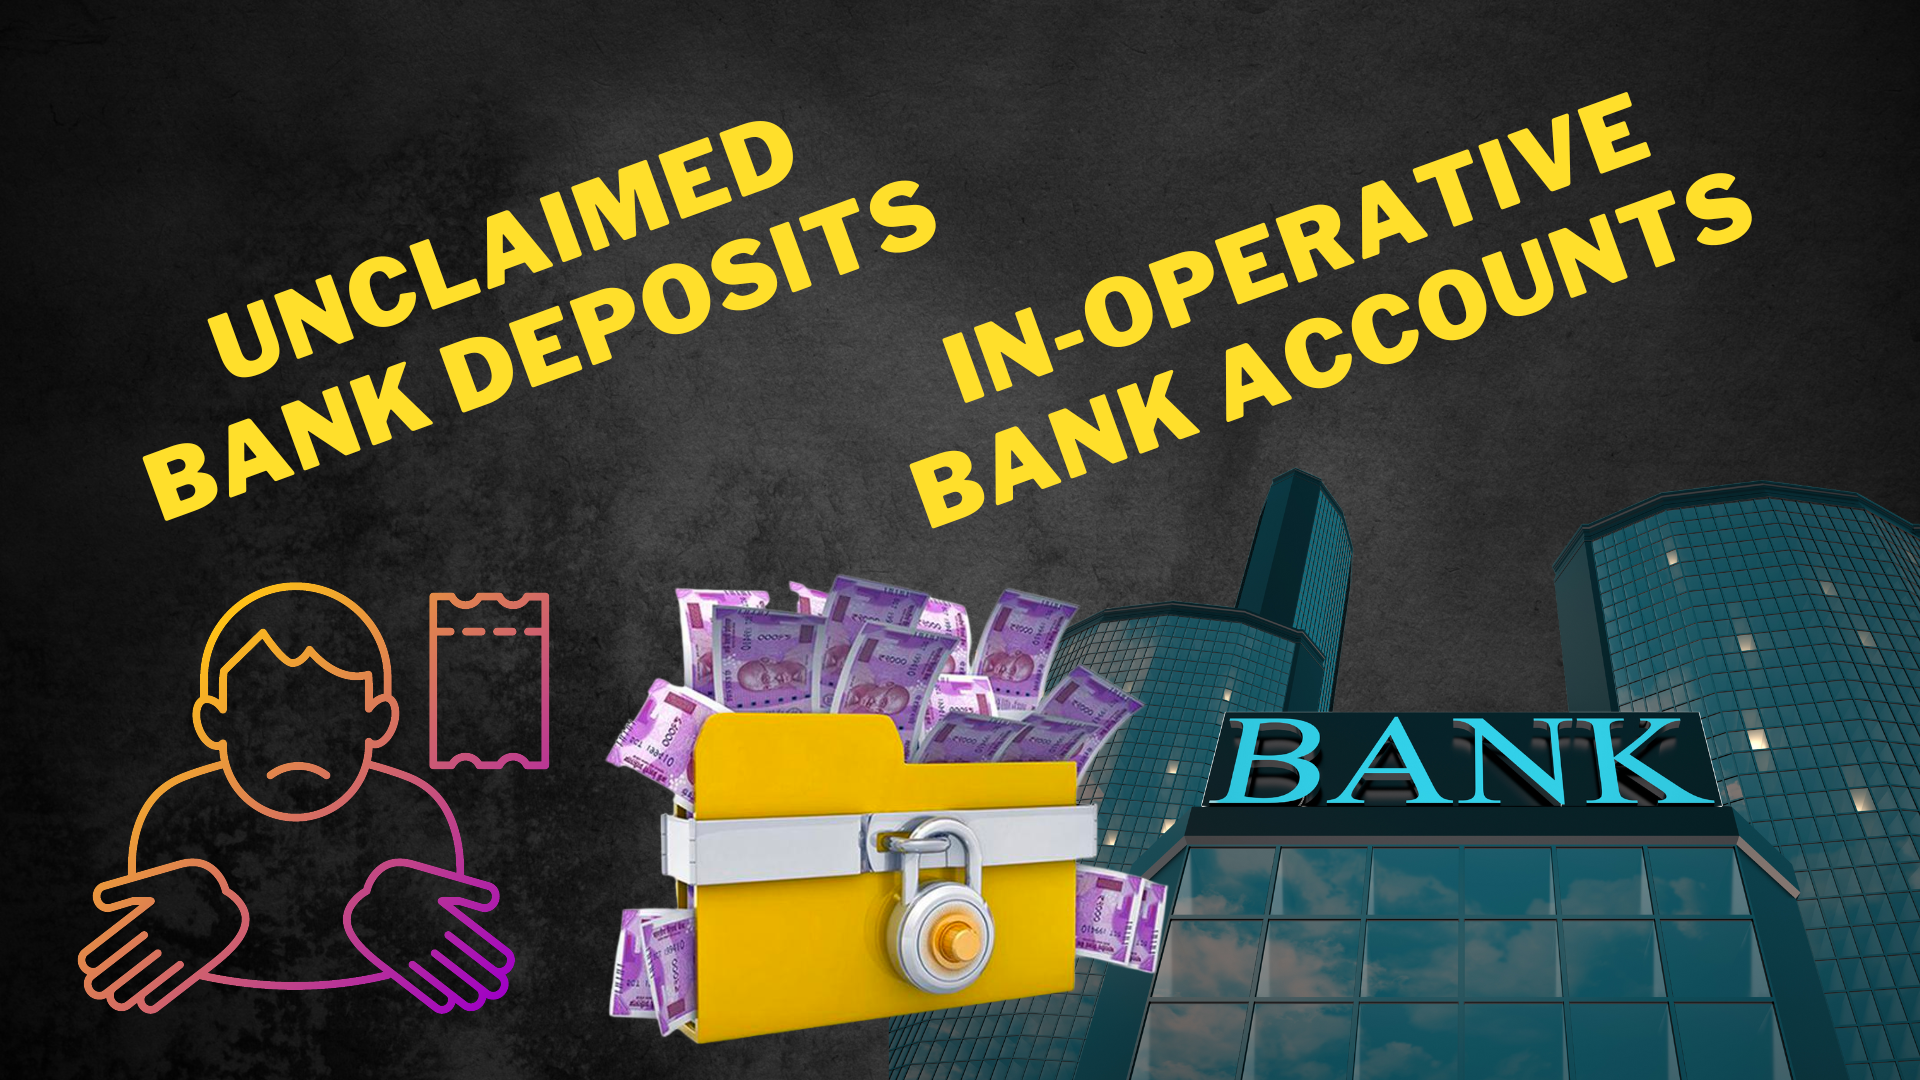 Here's all you need to know about Unclaimed bank deposits and In-operative bank accounts